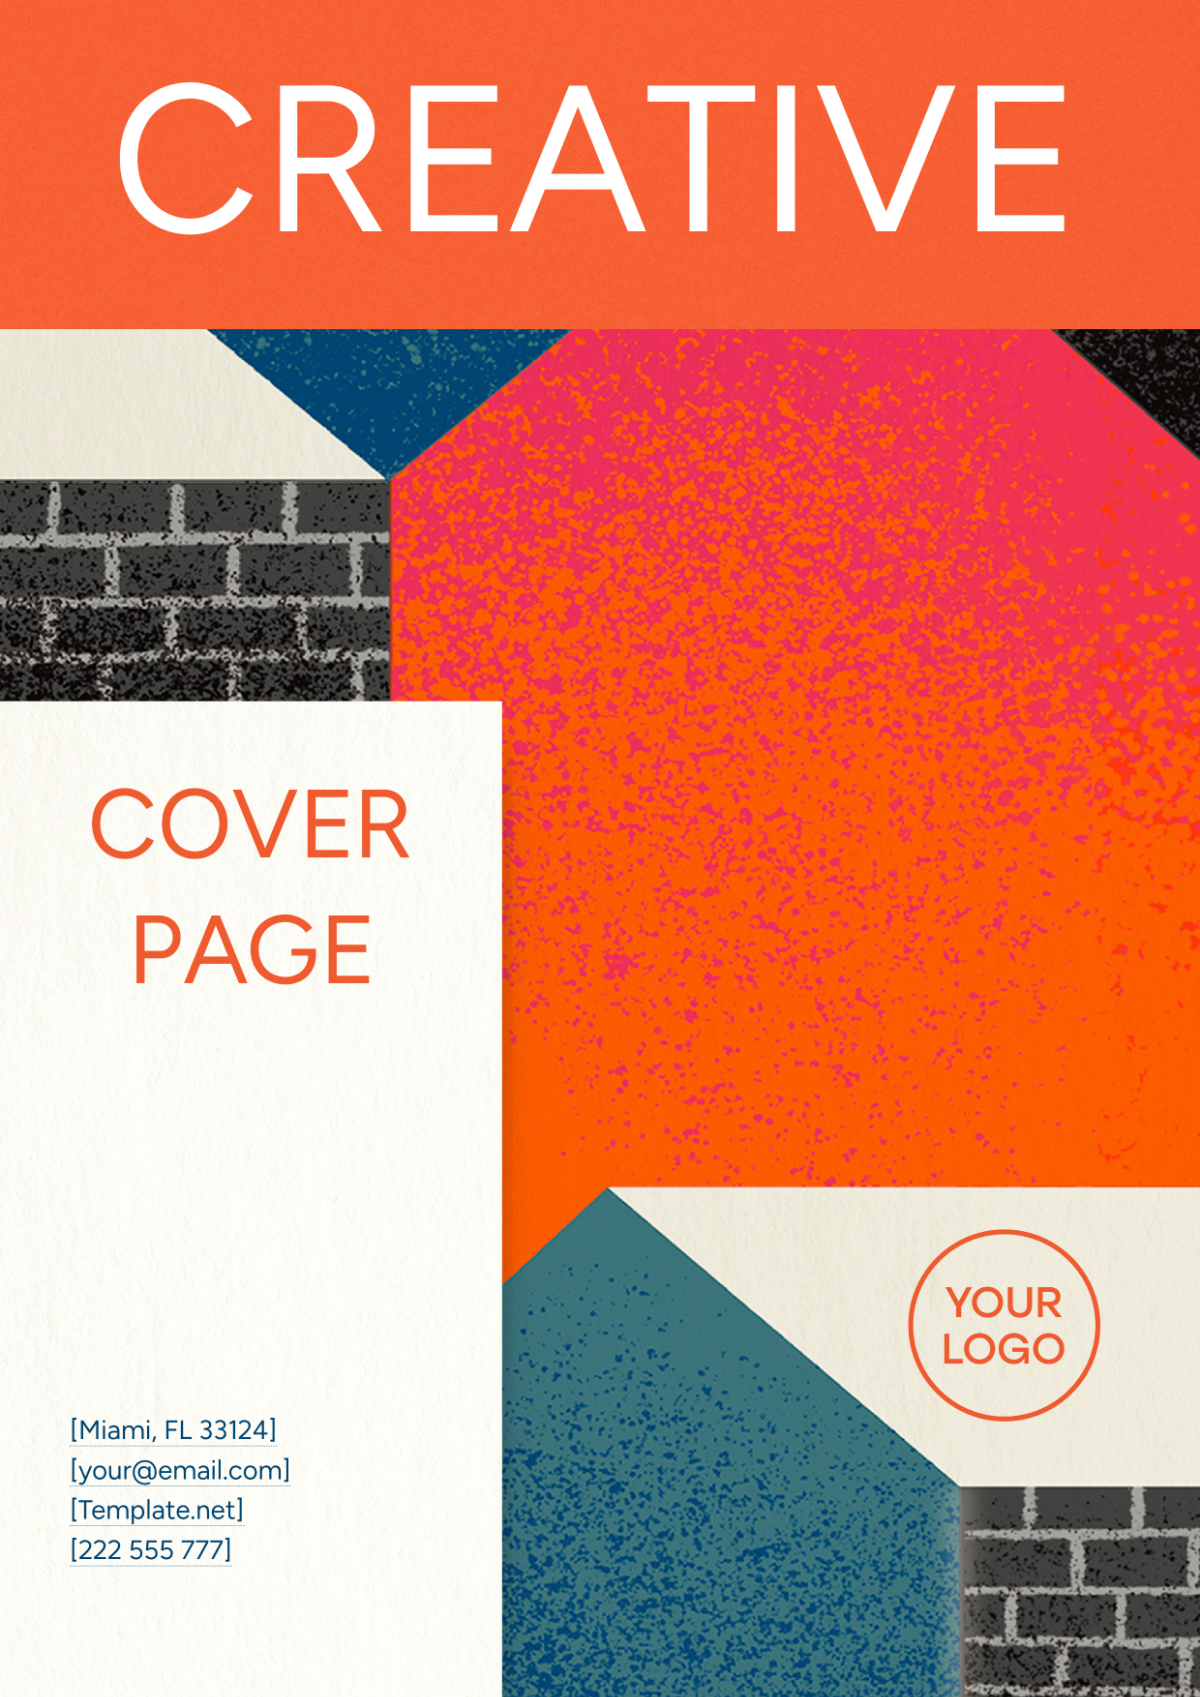 Creative Cover Page Image Template